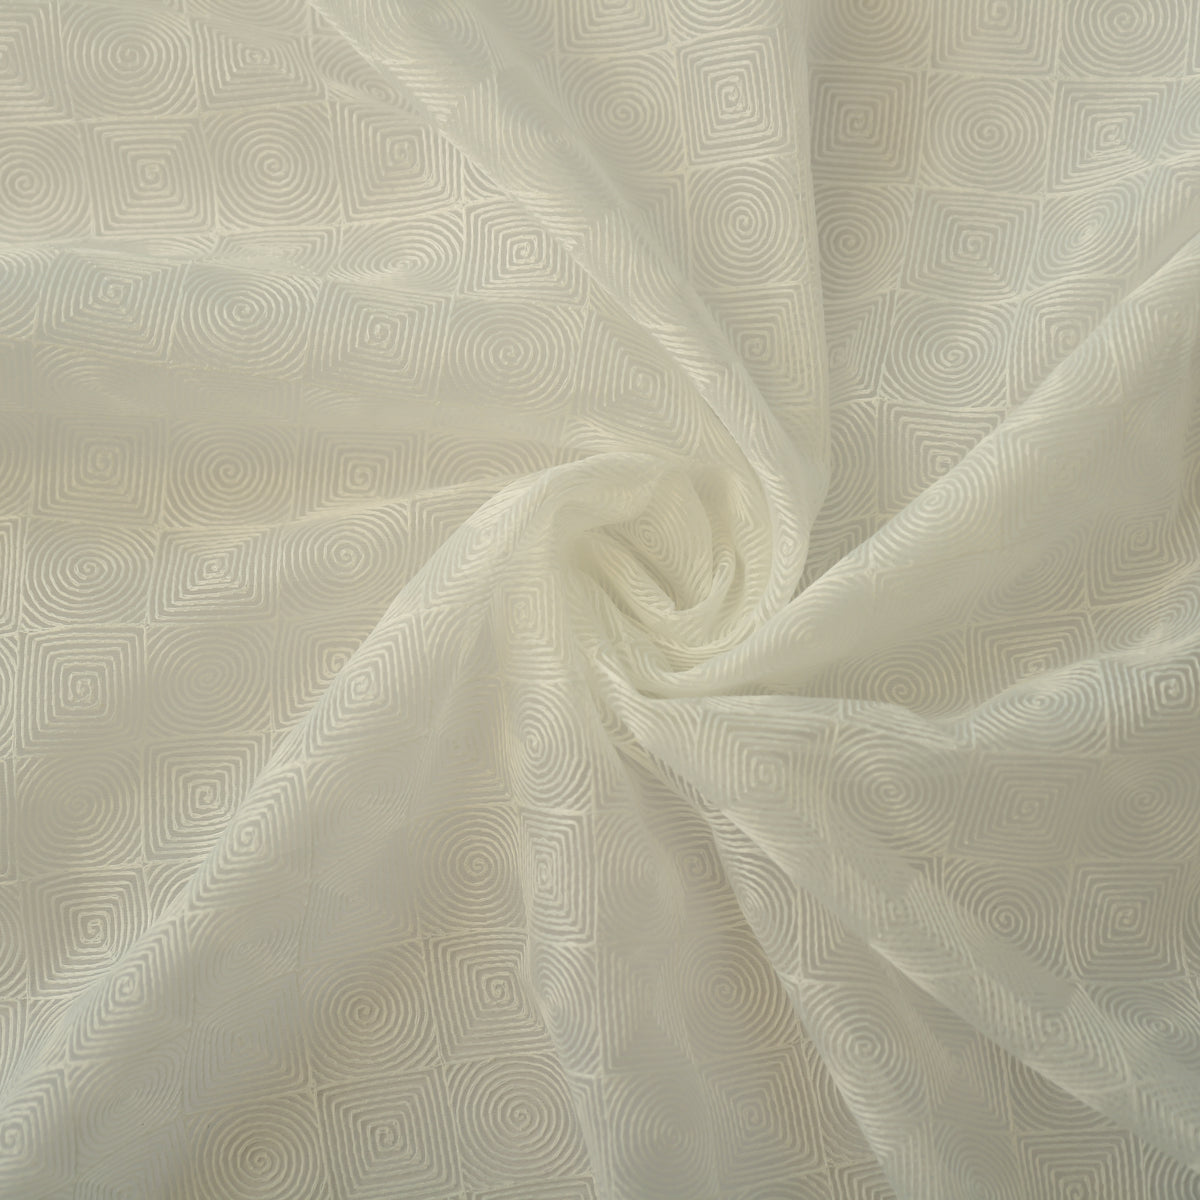 Day curtain offwhite Briona